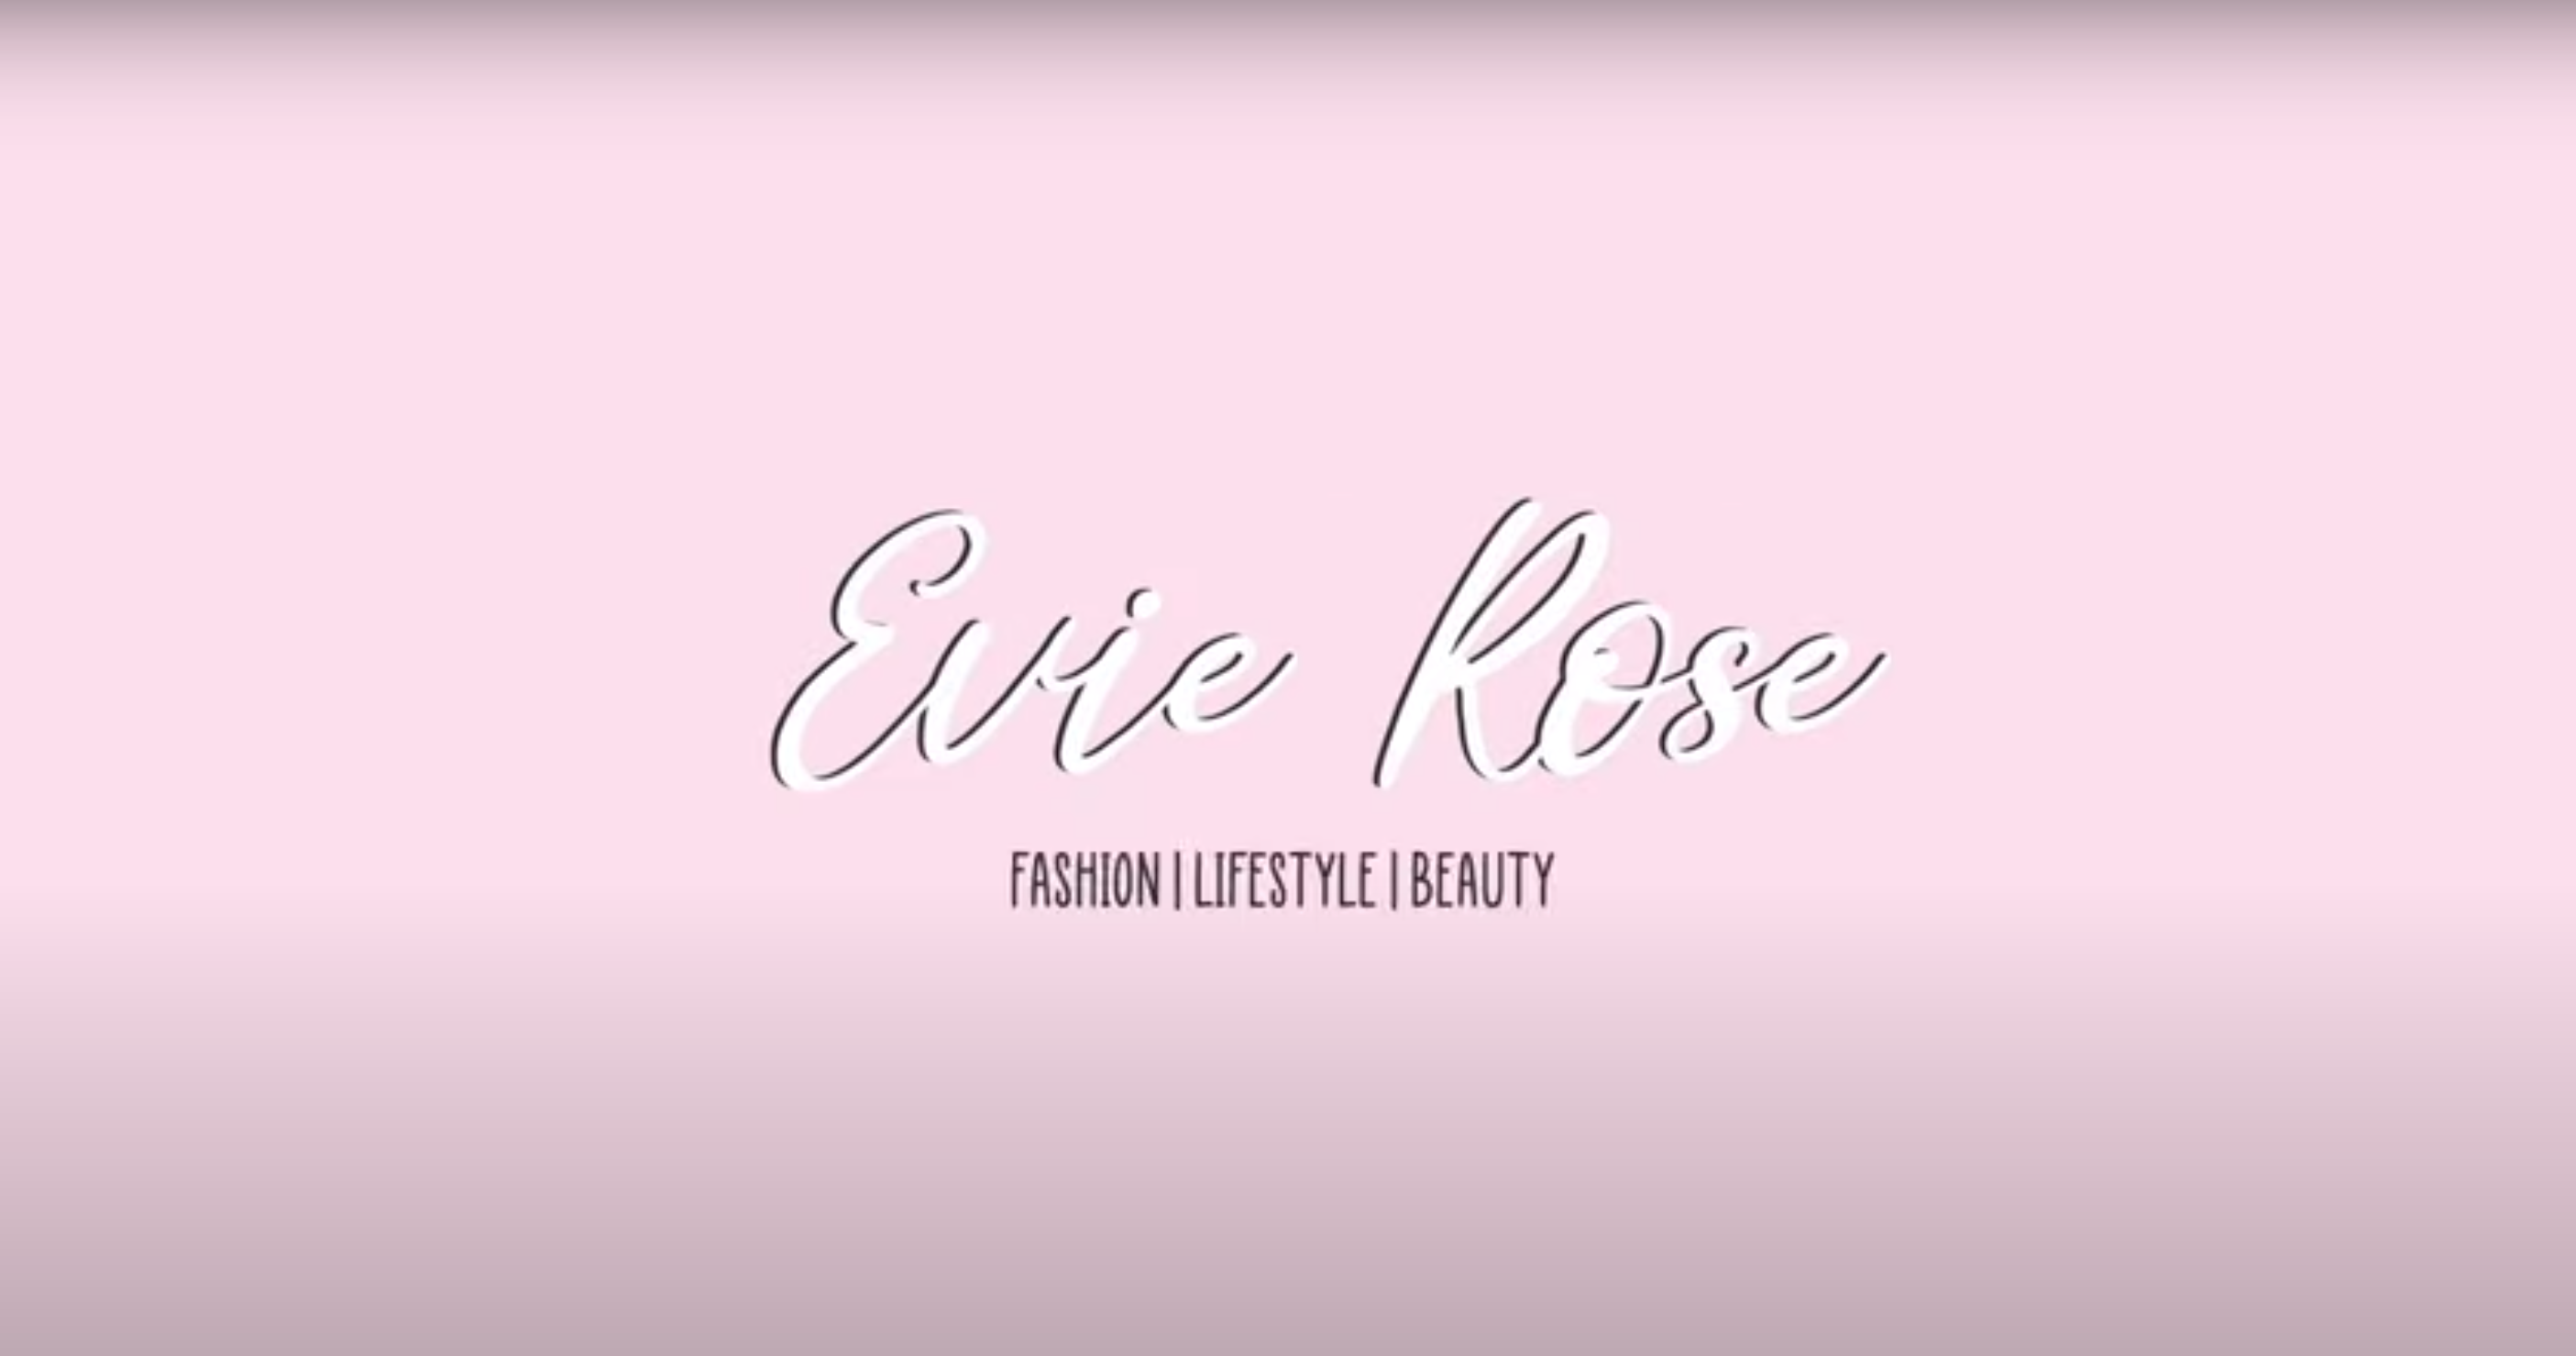 Pink background with cursive text that says "Evie Rose fashion beauty lifestyle"